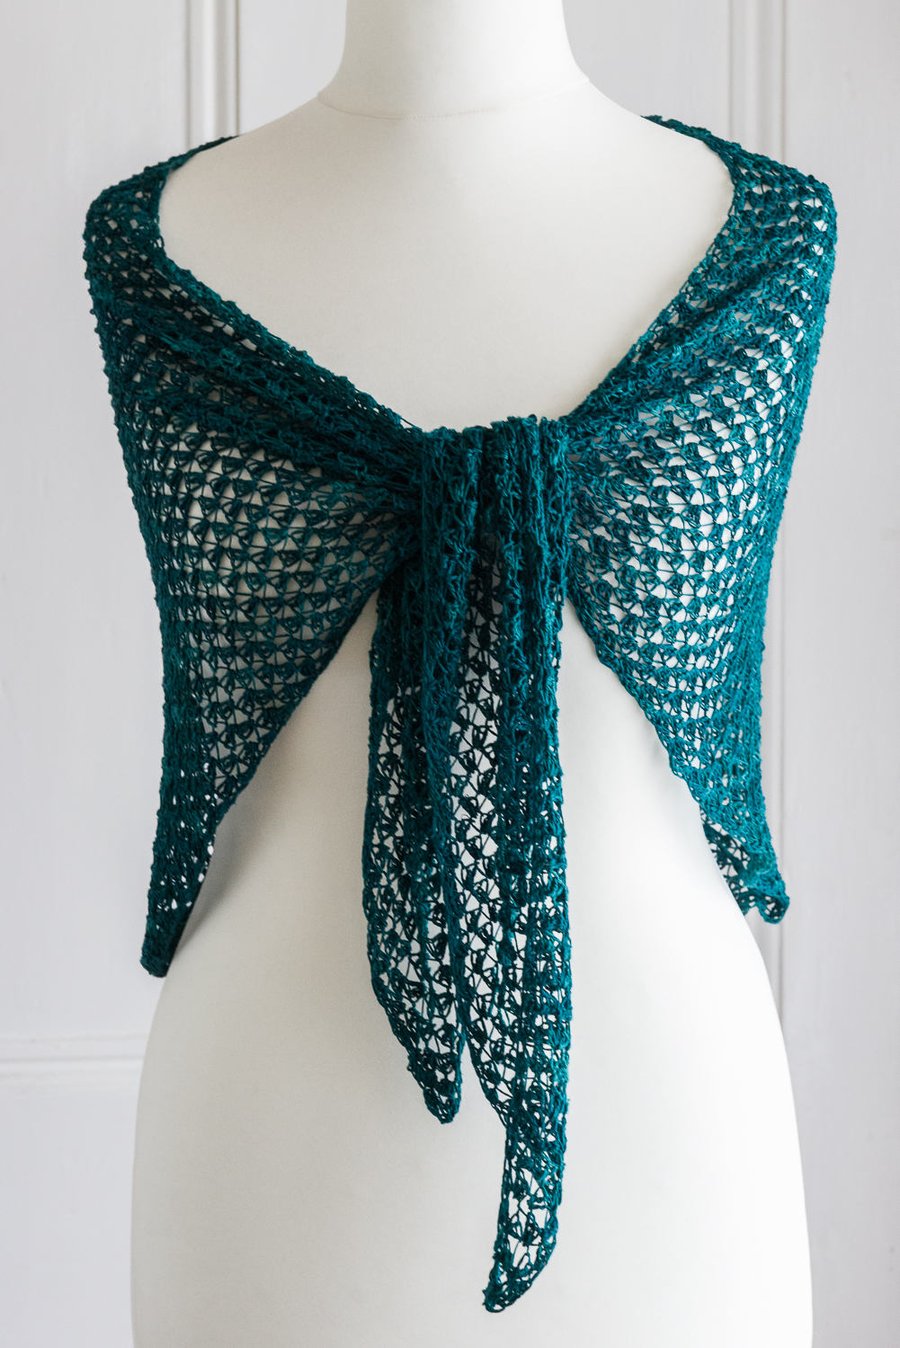 Crochet silk shawl, made with a hand dyed pure mulberry silk in jewelled green